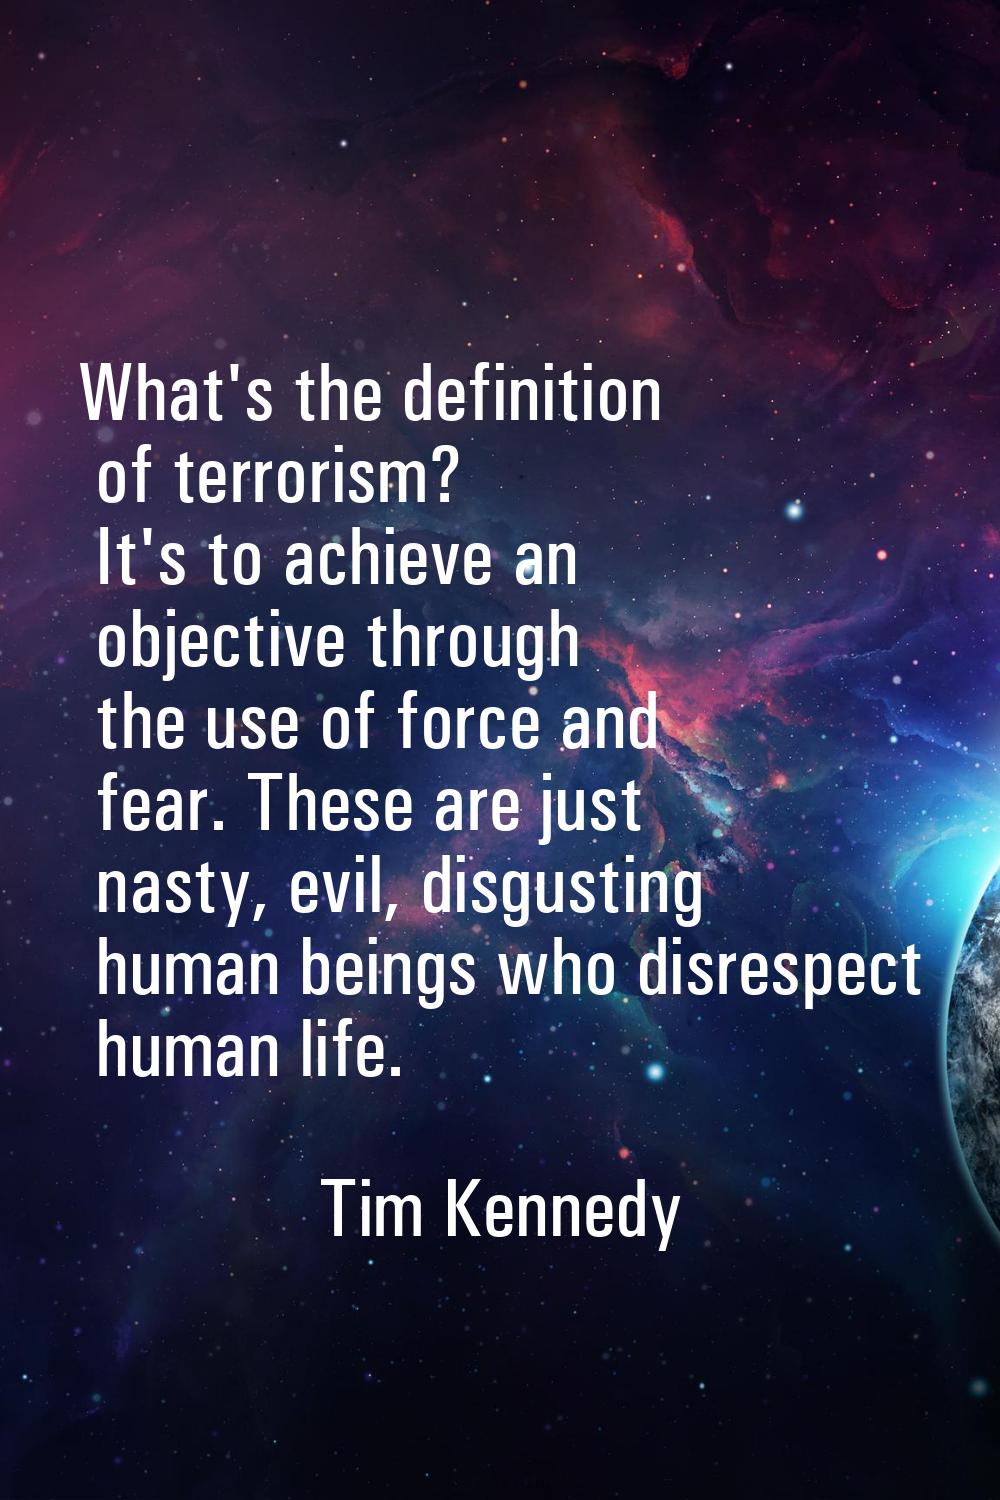 What's the definition of terrorism? It's to achieve an objective through the use of force and fear.